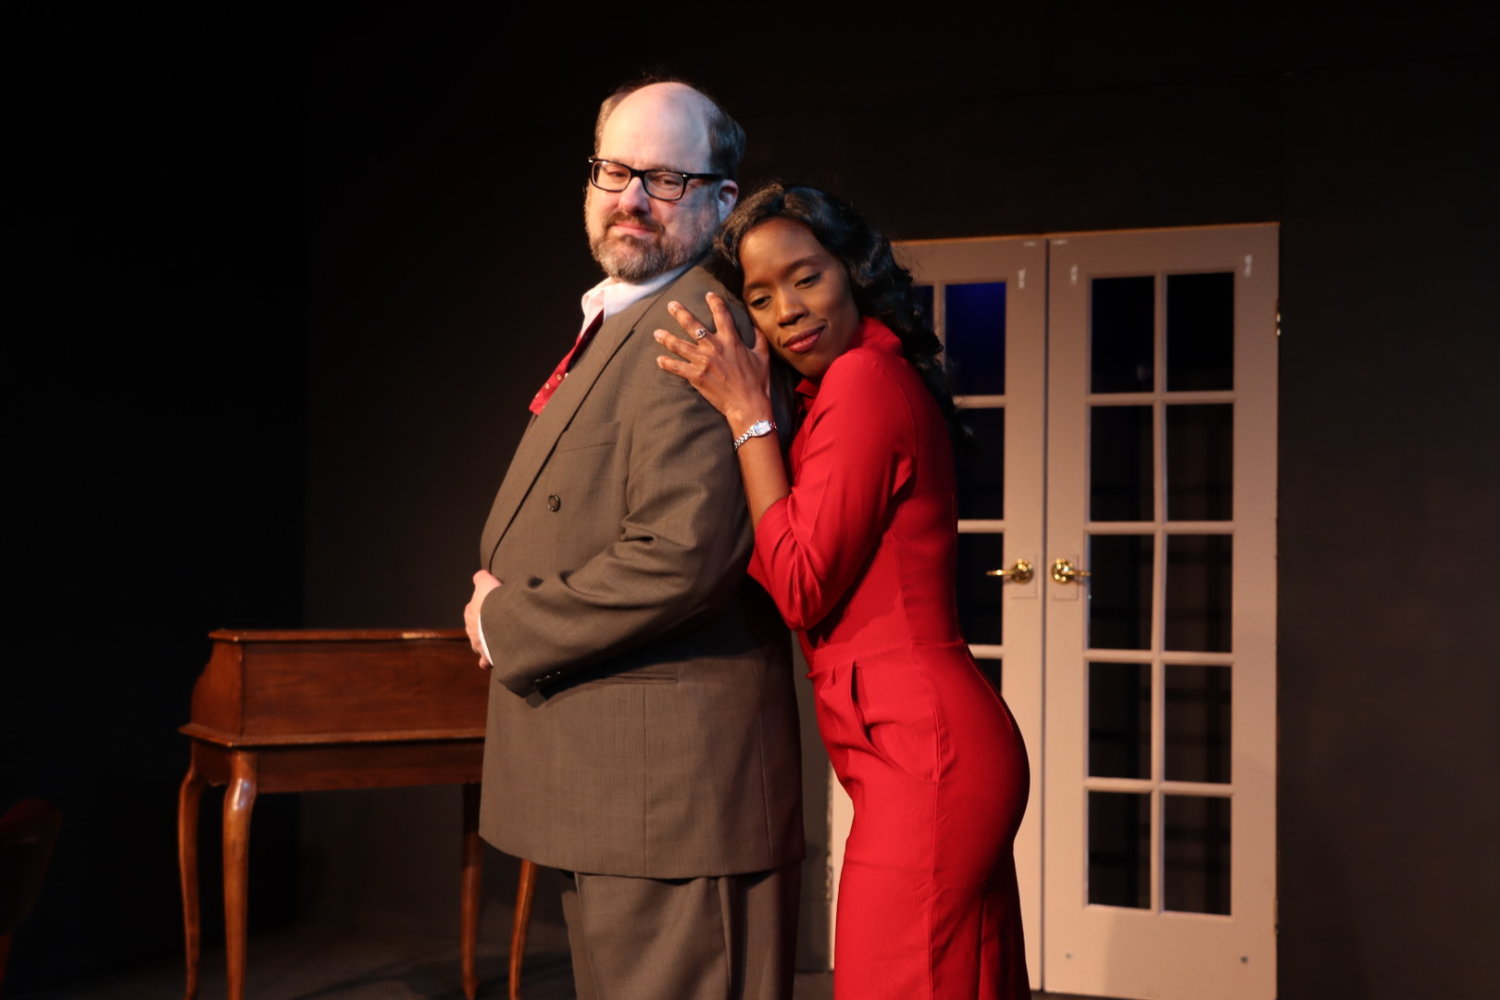 Jack Bathke and Nyiema Lunsford in ActorsNET’s “Seven Keys to Baldpate,” opening March 11.